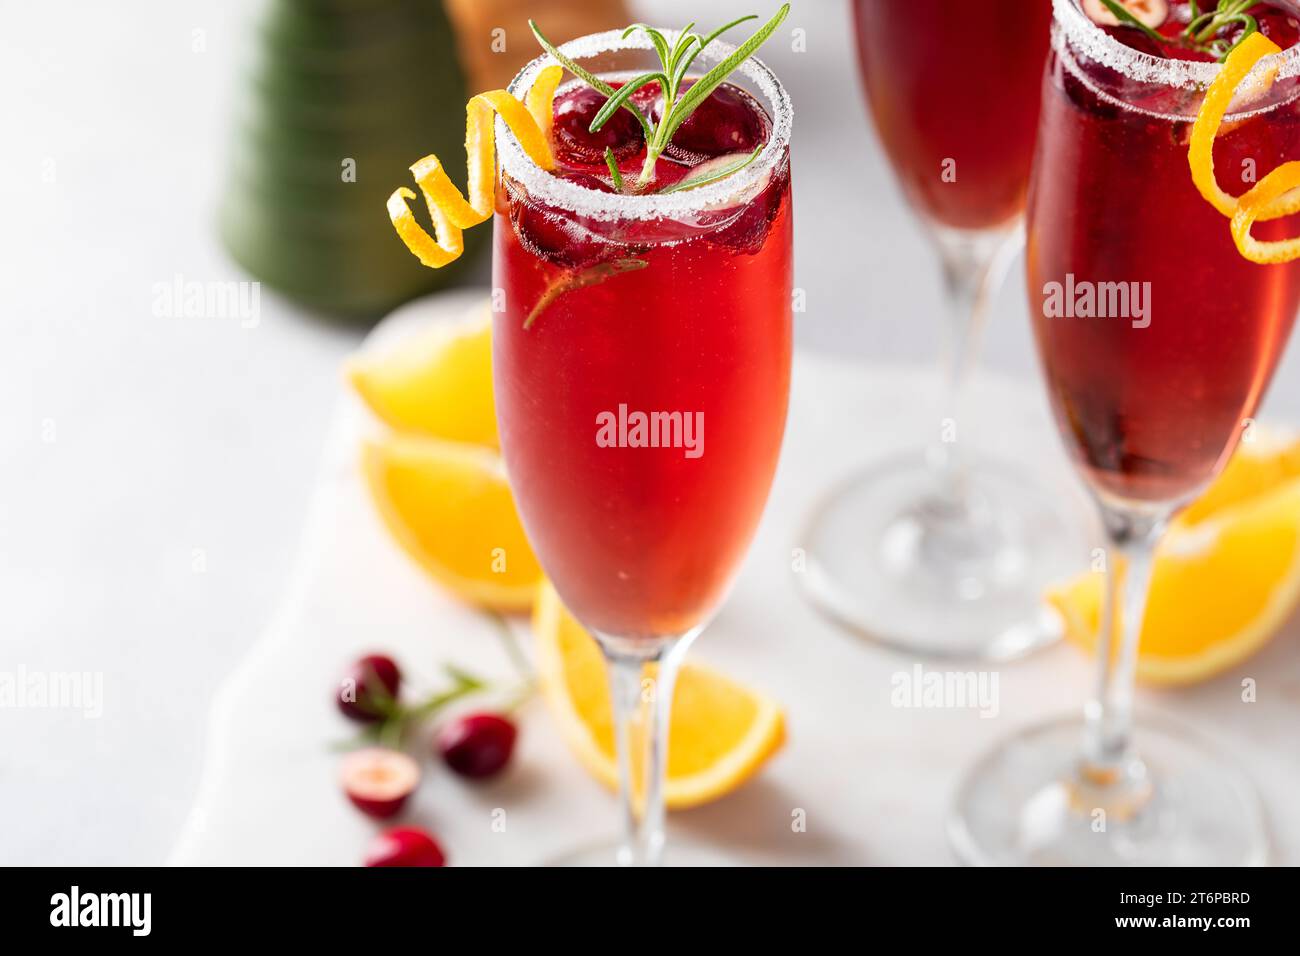 Christmas mimosas with cranberry juice and champagne or sparkling wine, festive Christmas cocktails garnished with orange peel twist Stock Photo